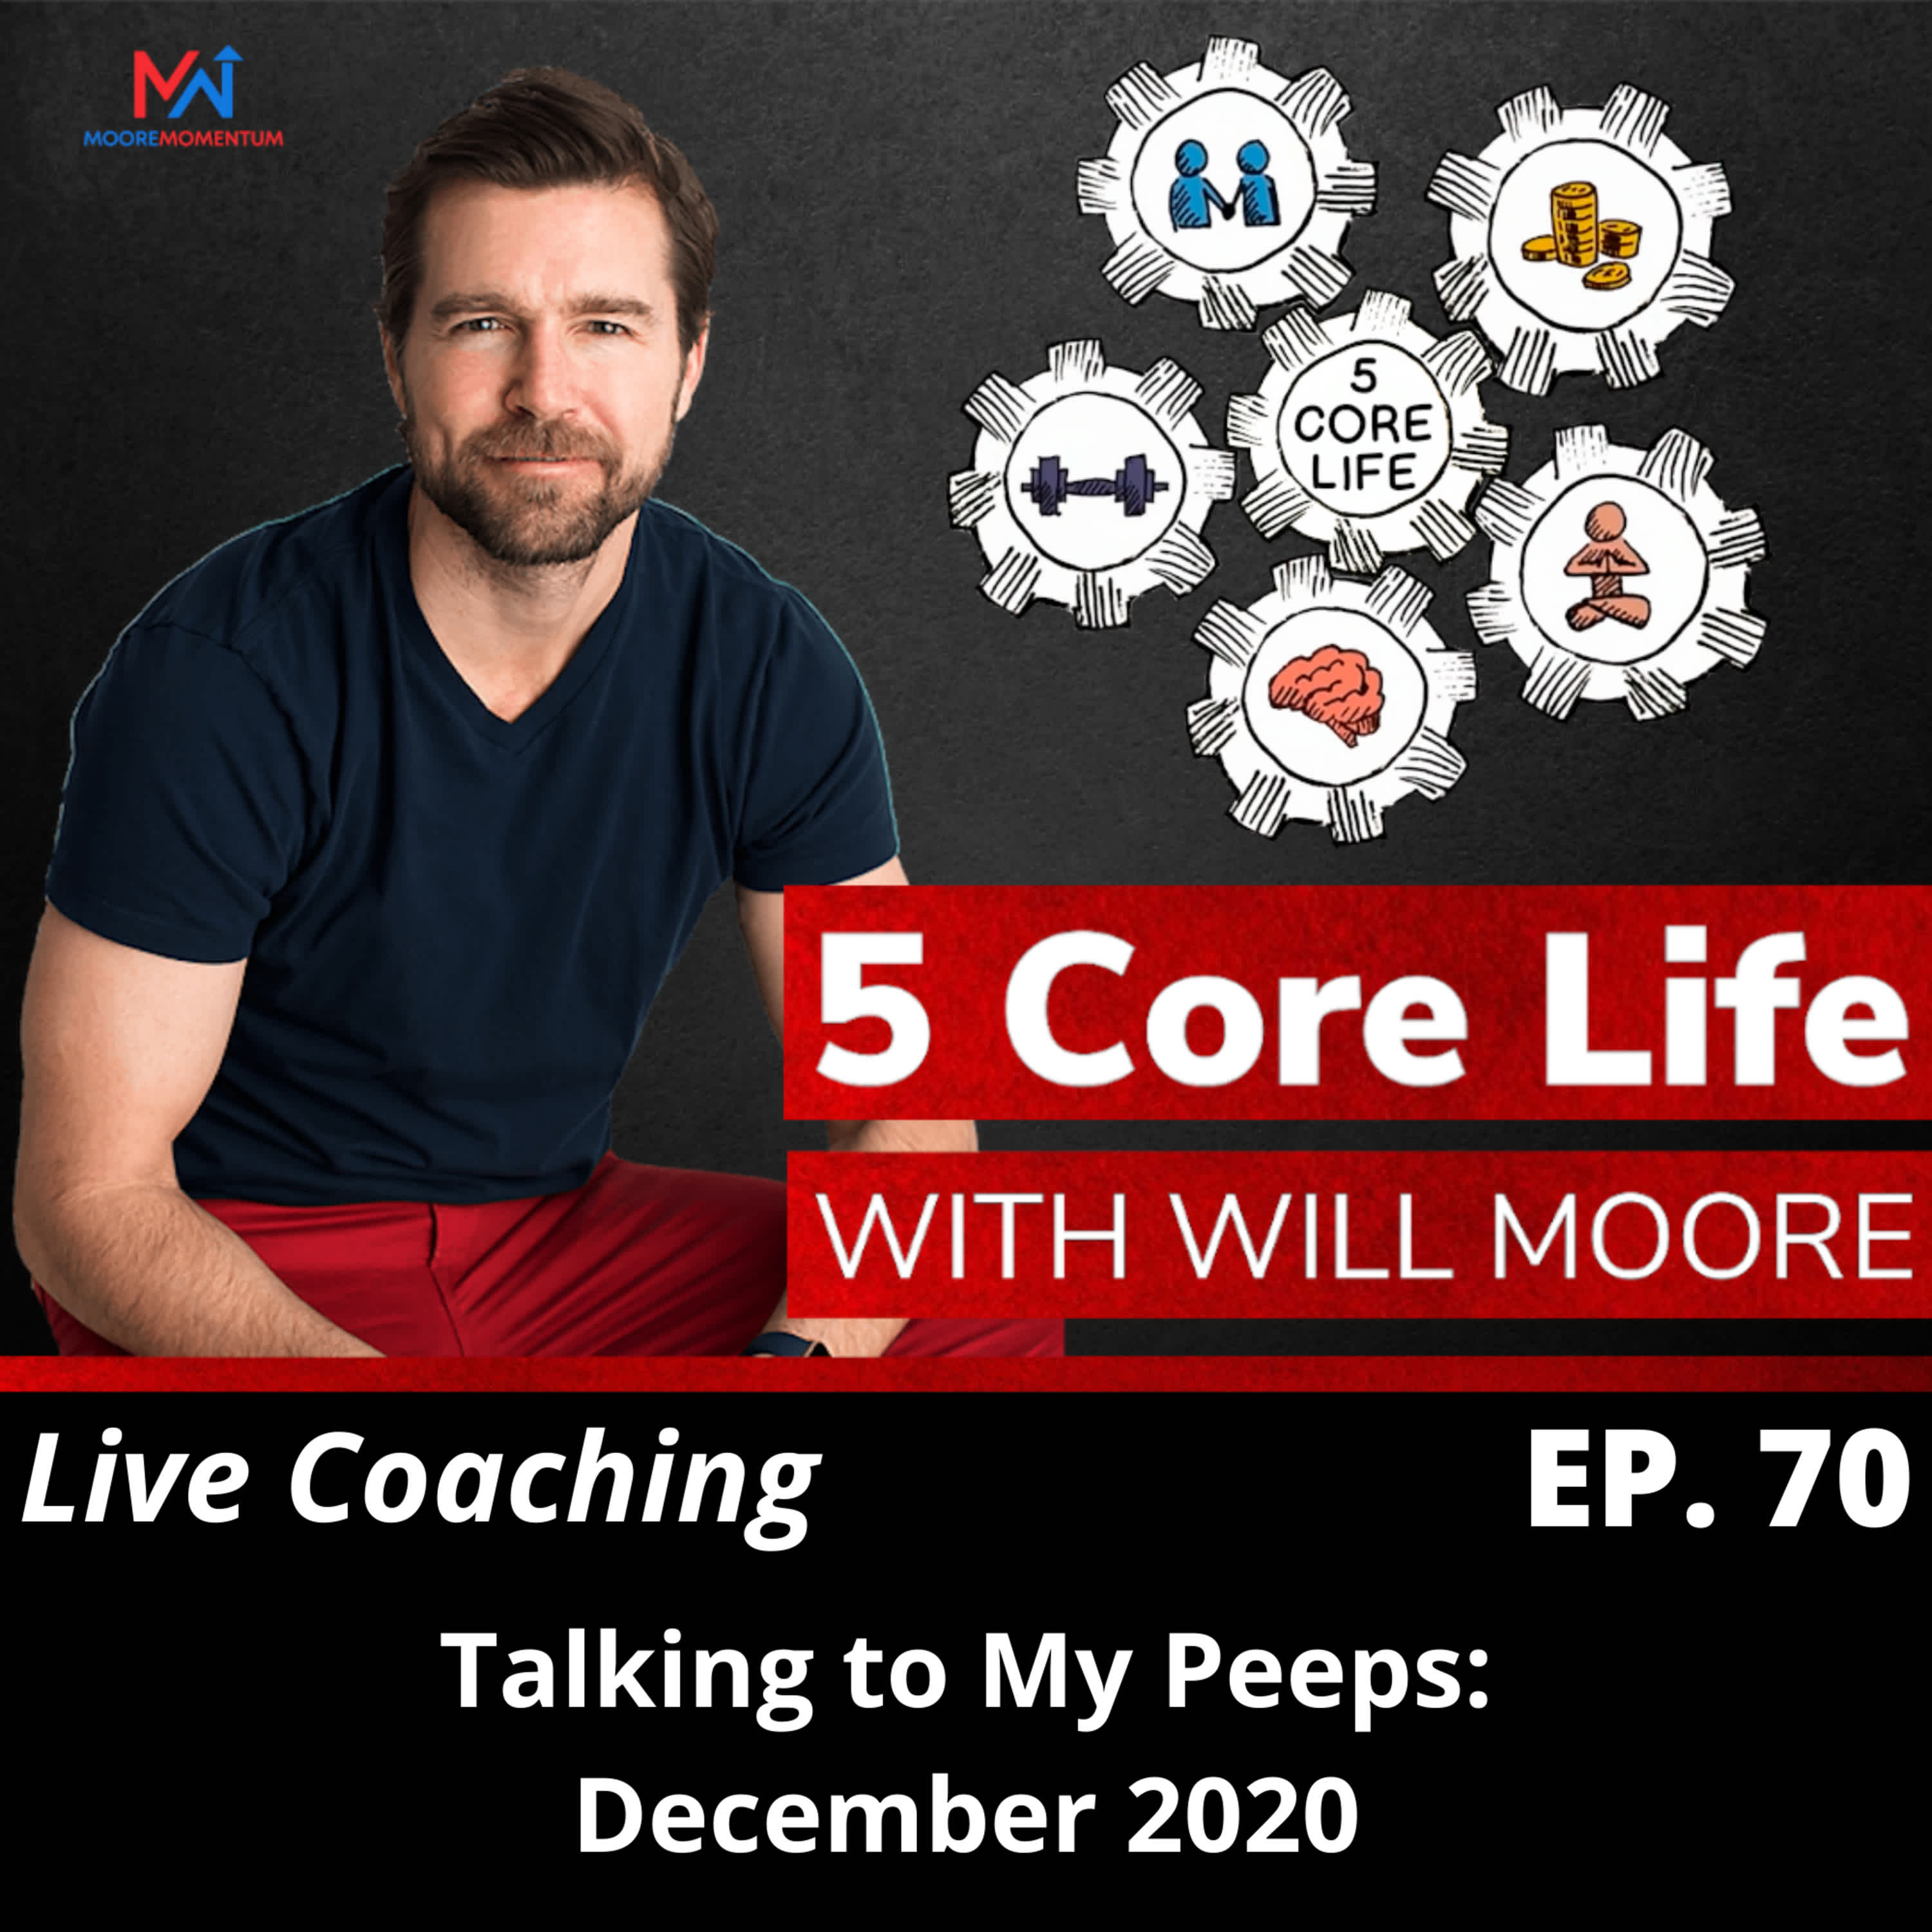 5 Core Live Coaching Call, December 2020